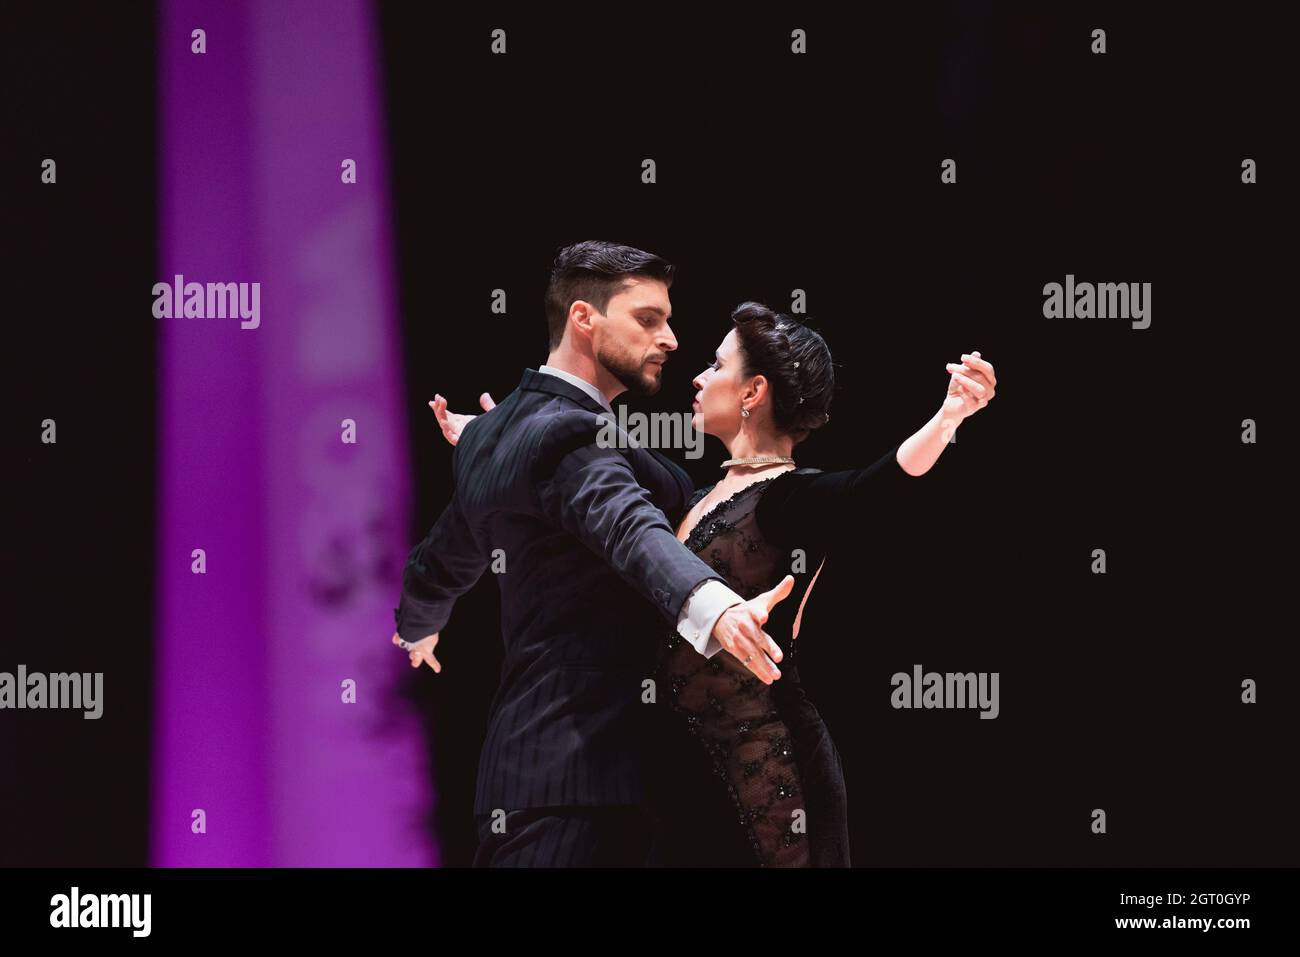 25 September 2021, Argentina, Buenos Aires: Pedro Zamin y Florencia Méndez during the final round of the World Tango Championship. Stock Photo